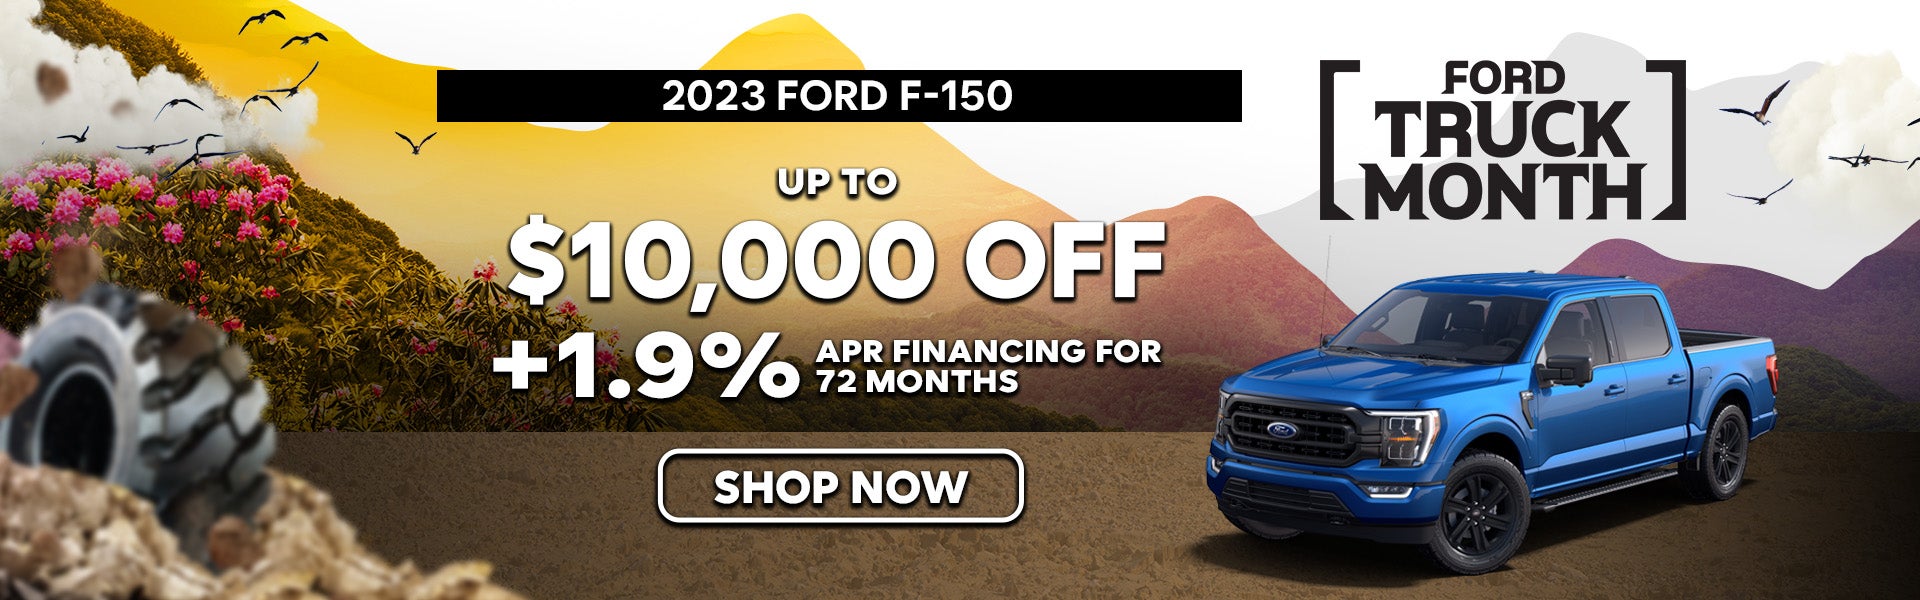 2023 Ford F-150 Special Offer